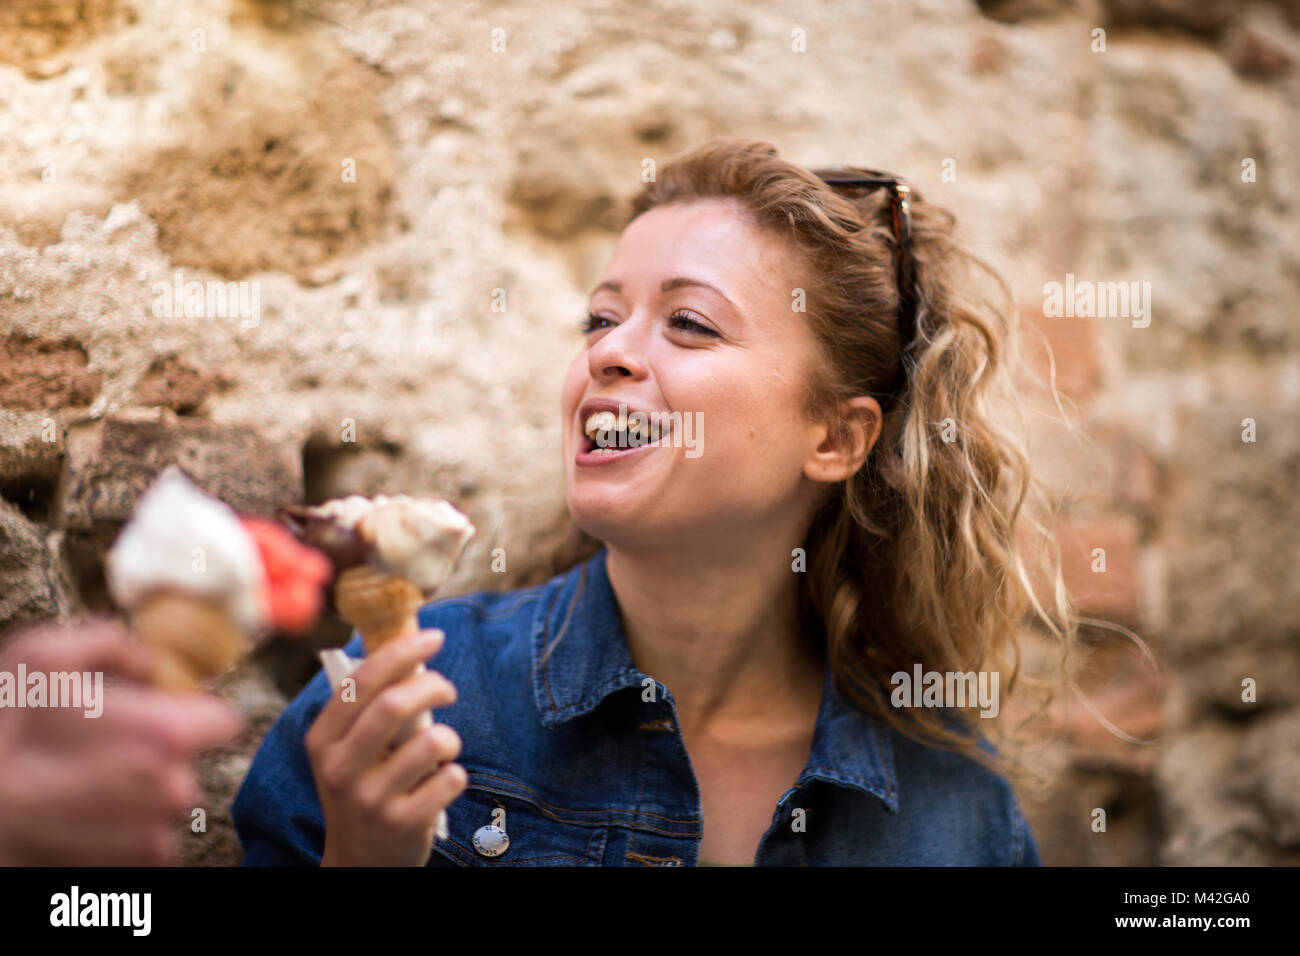 Young female eating gelato with friend Stock Photo